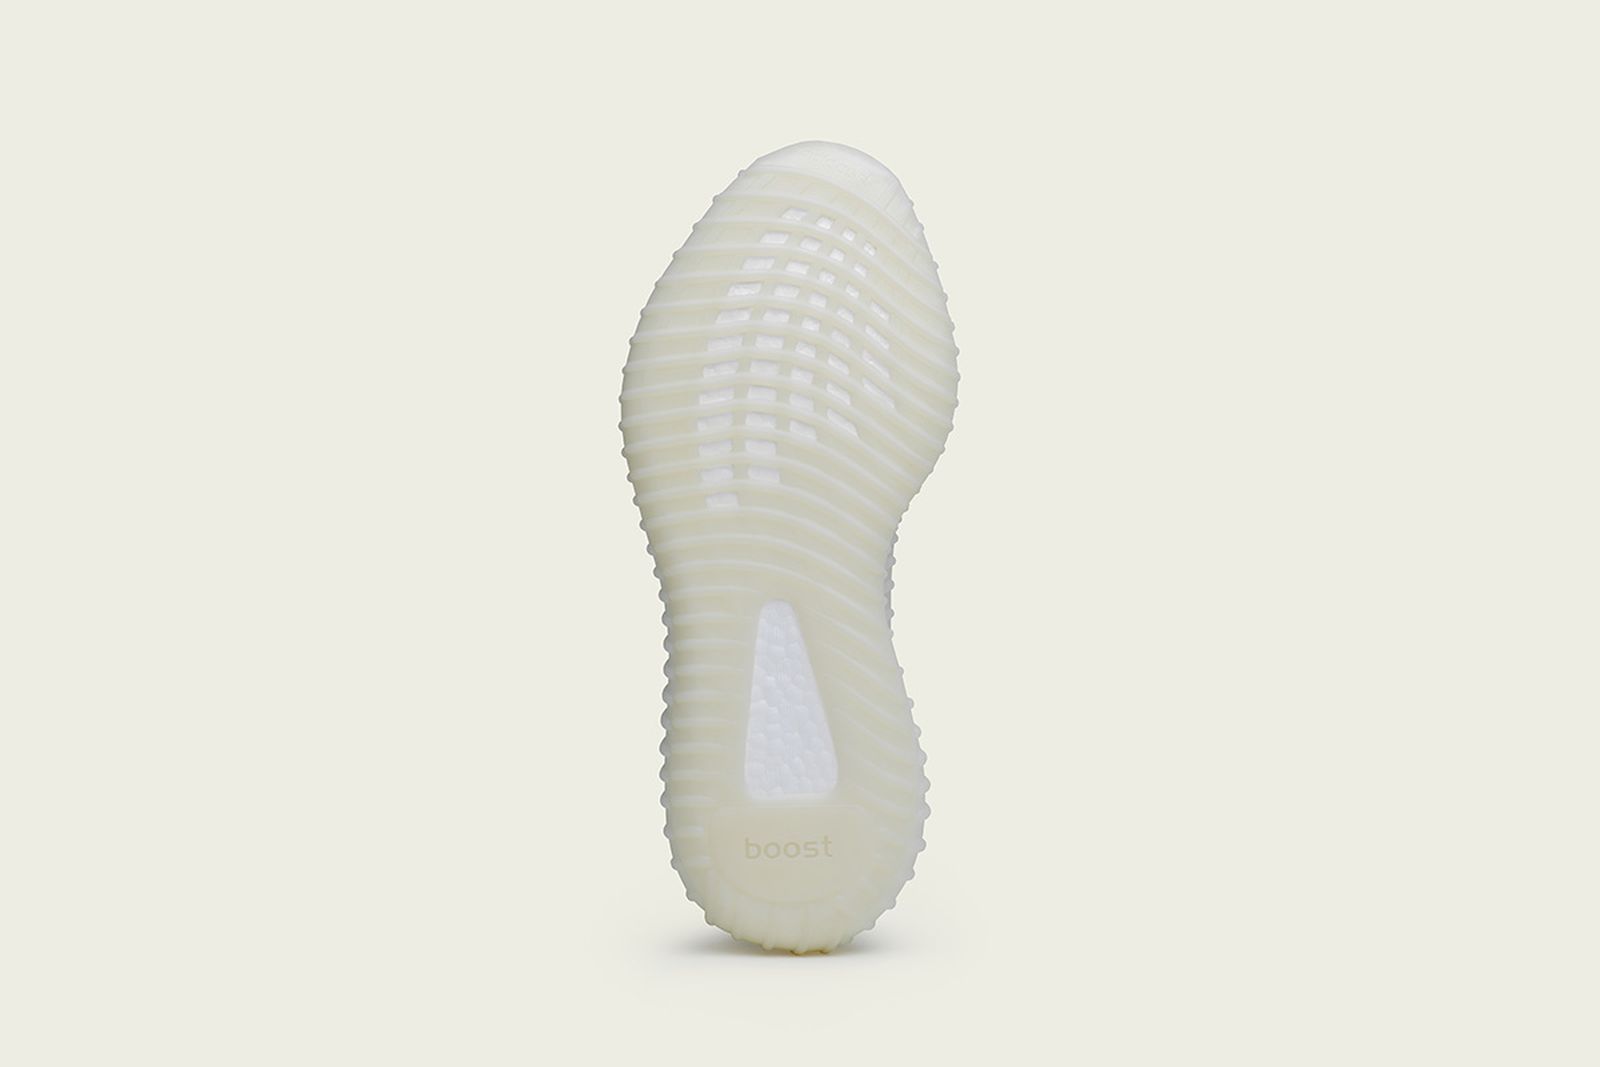 adidas Yeezy Boost 350 "Triple White": Sign Up For Updates